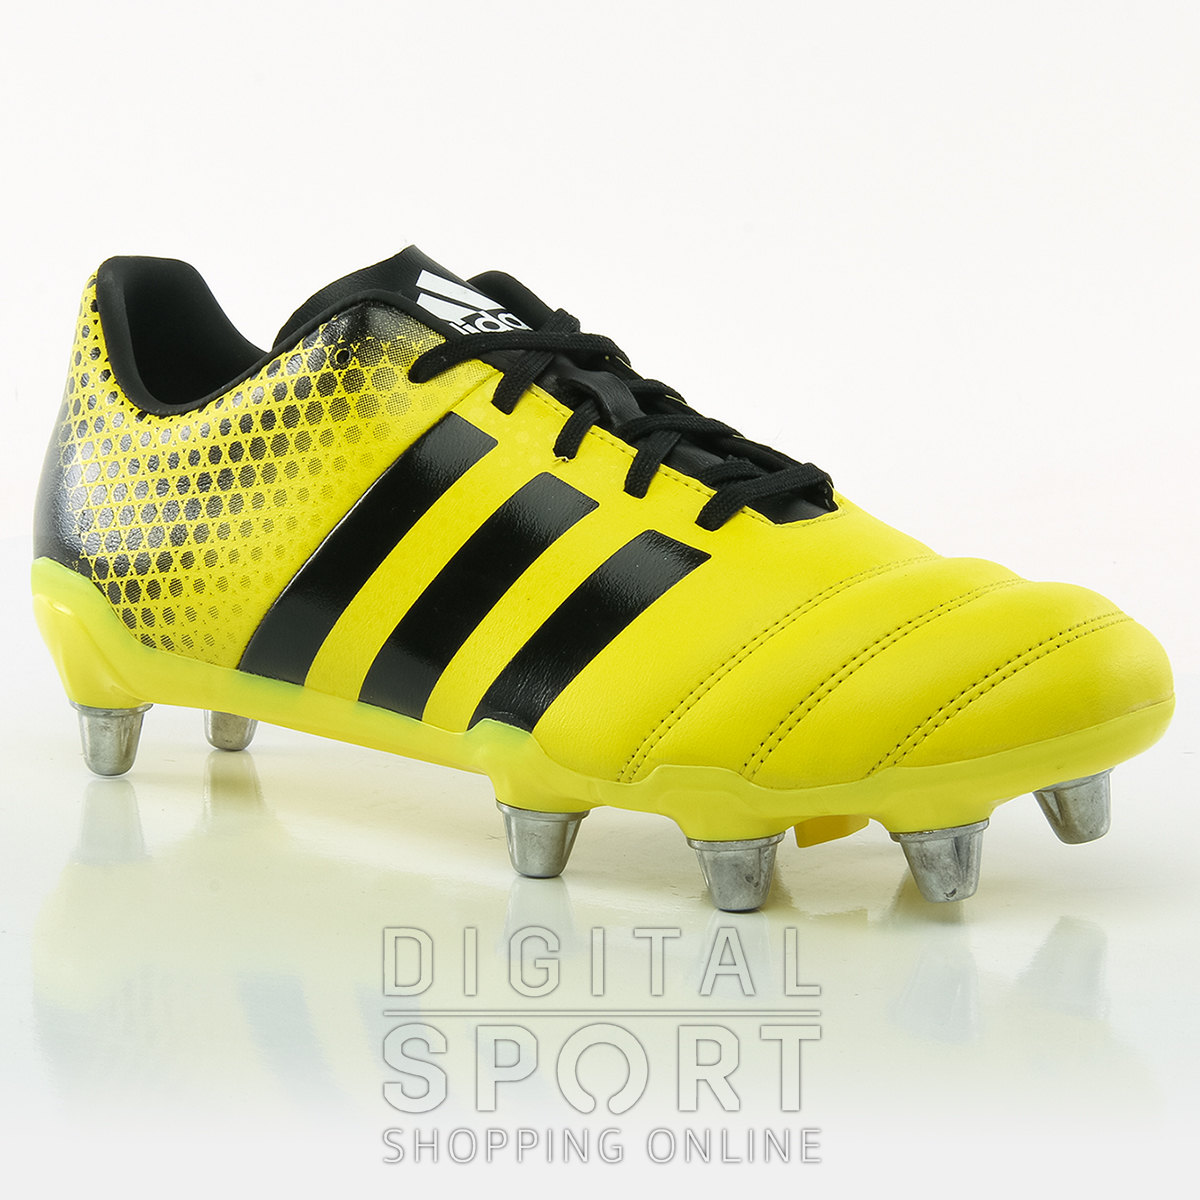 Adidas Botines Rugby Tapones Intercambiables Outlet, 57% OFF |  www.colegiogamarra.com